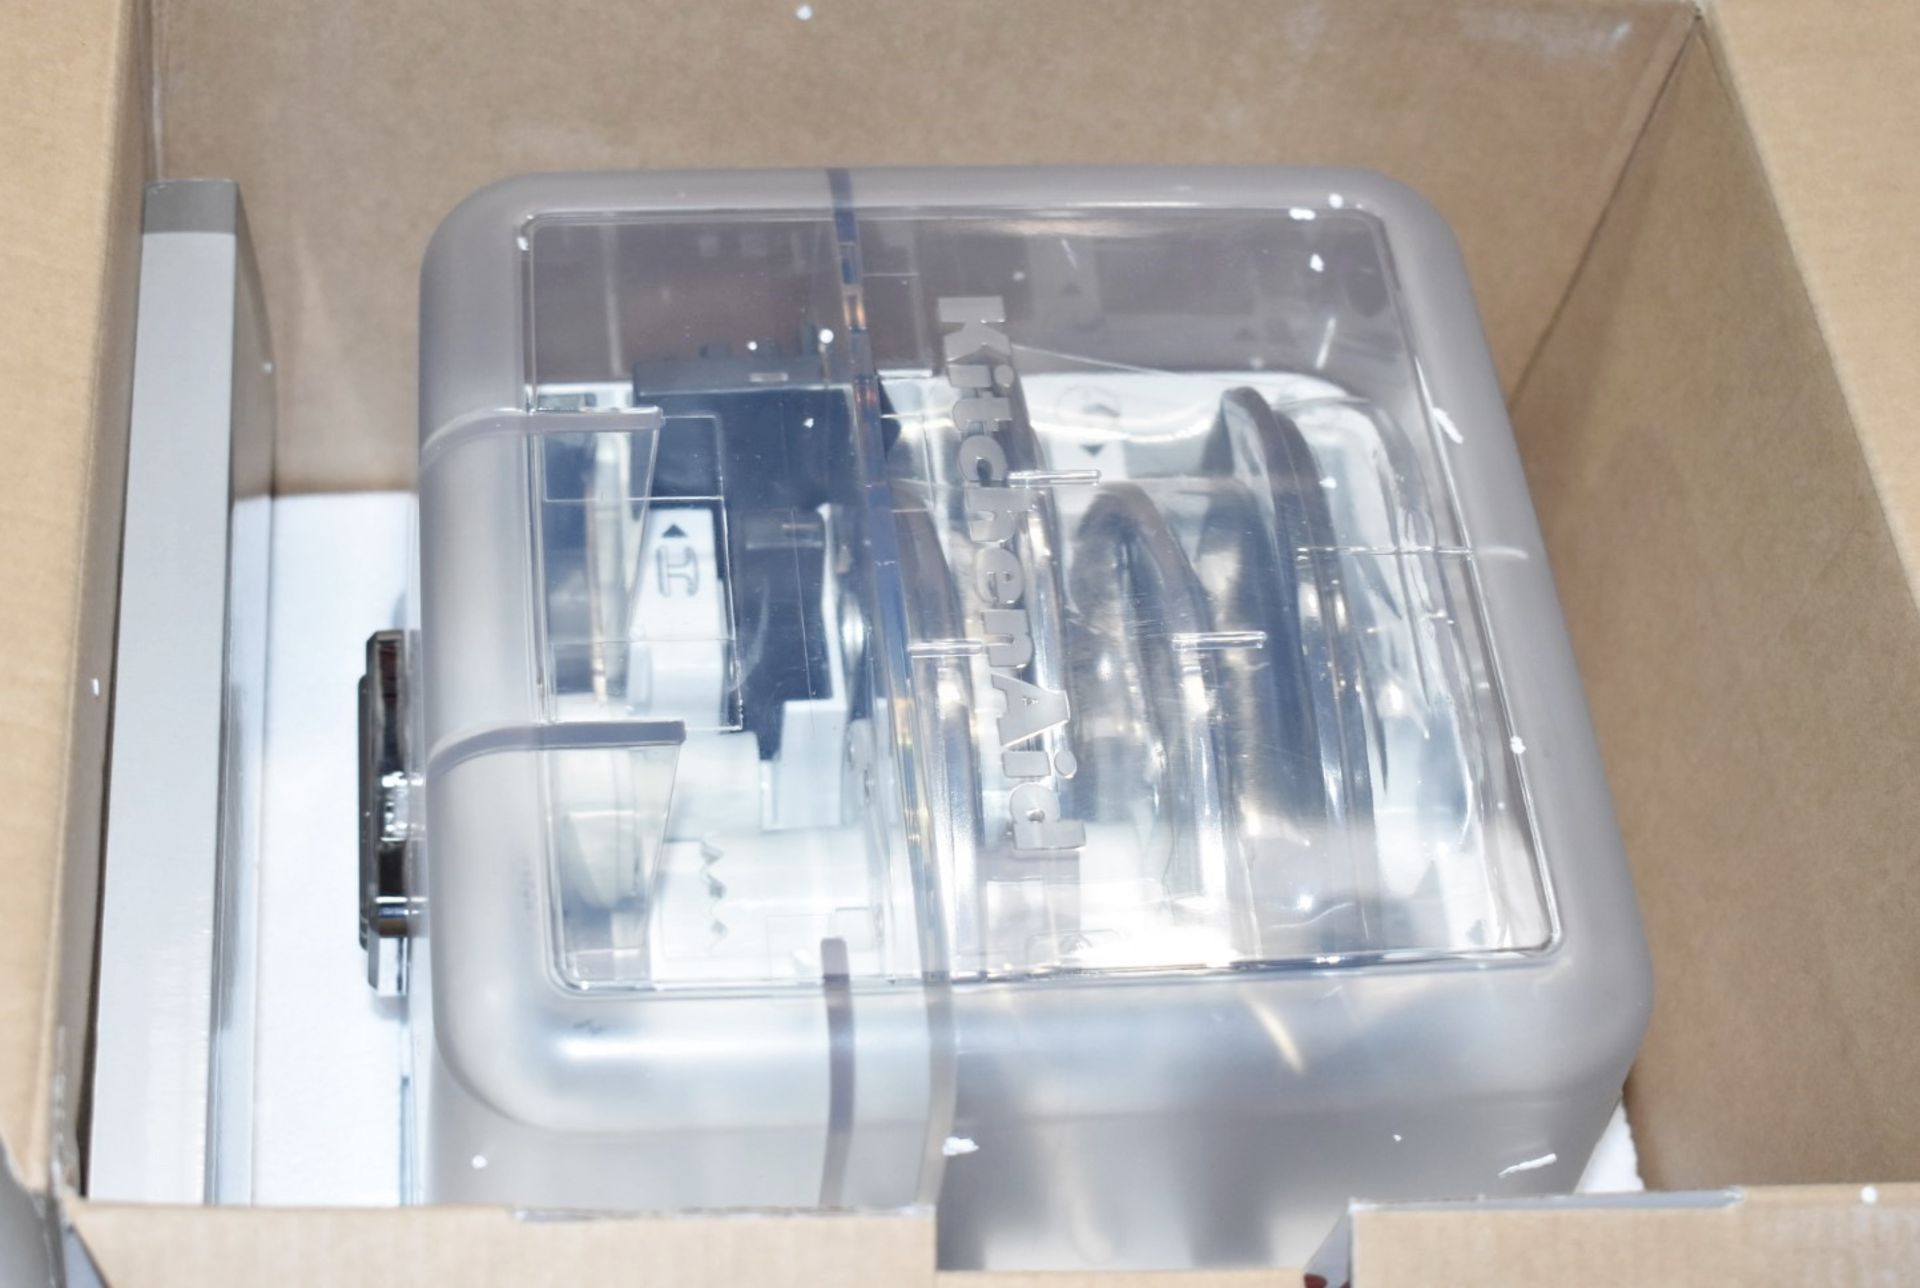 1 x KITCHENAID Artisan Food Processor Attachment with Blades - Boxed - Original Price £209.00 - Image 3 of 7